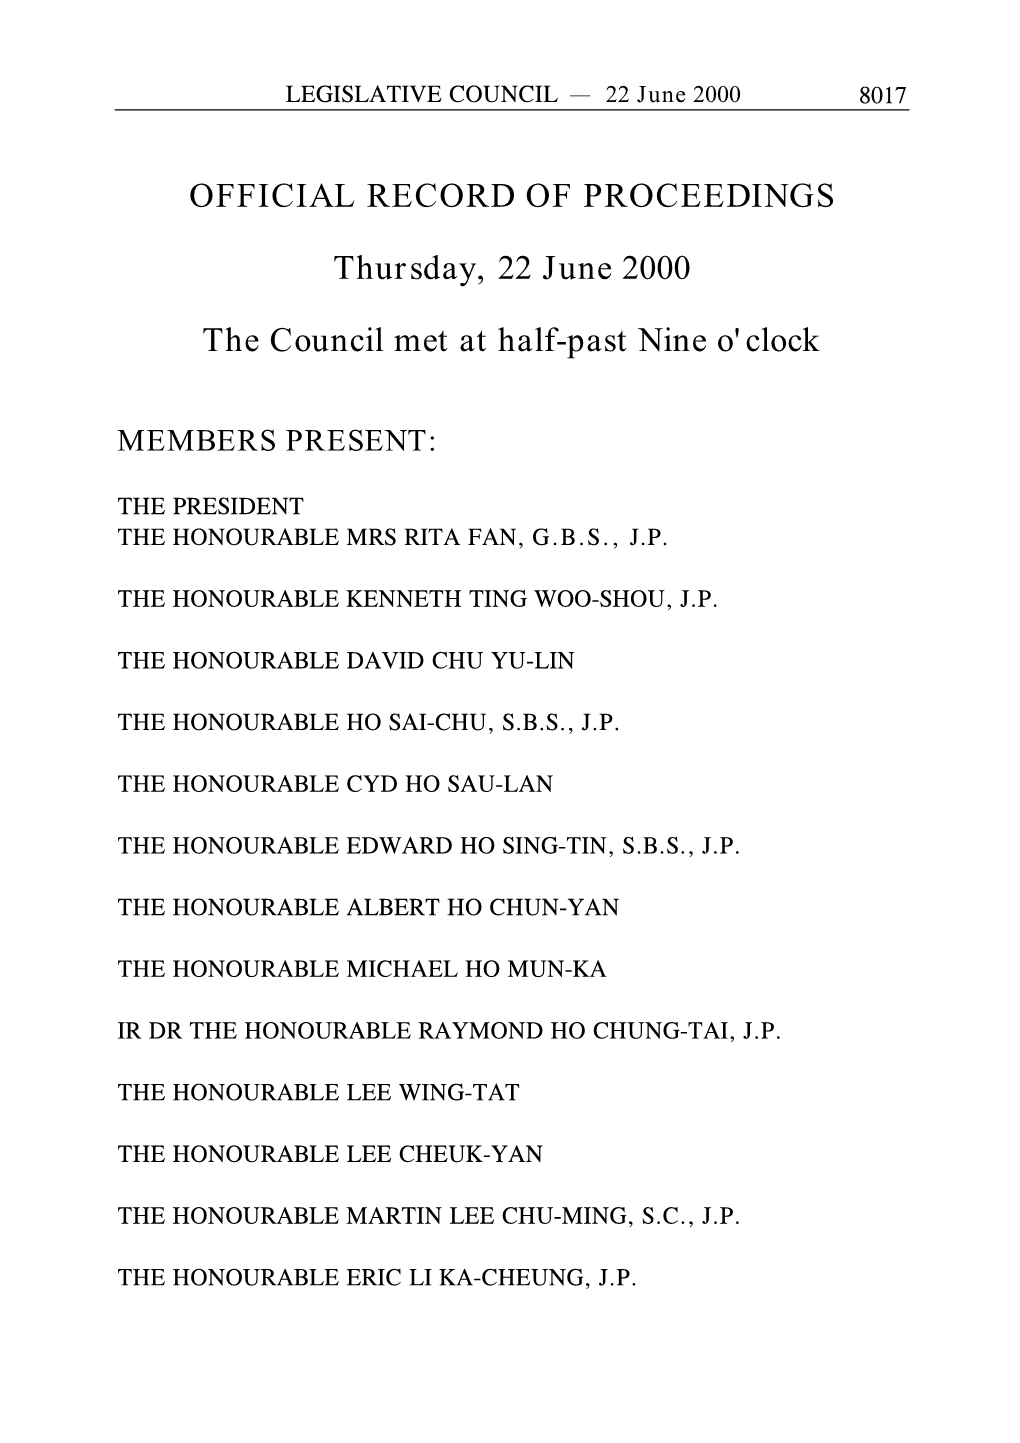 OFFICIAL RECORD of PROCEEDINGS Thursday, 22 June